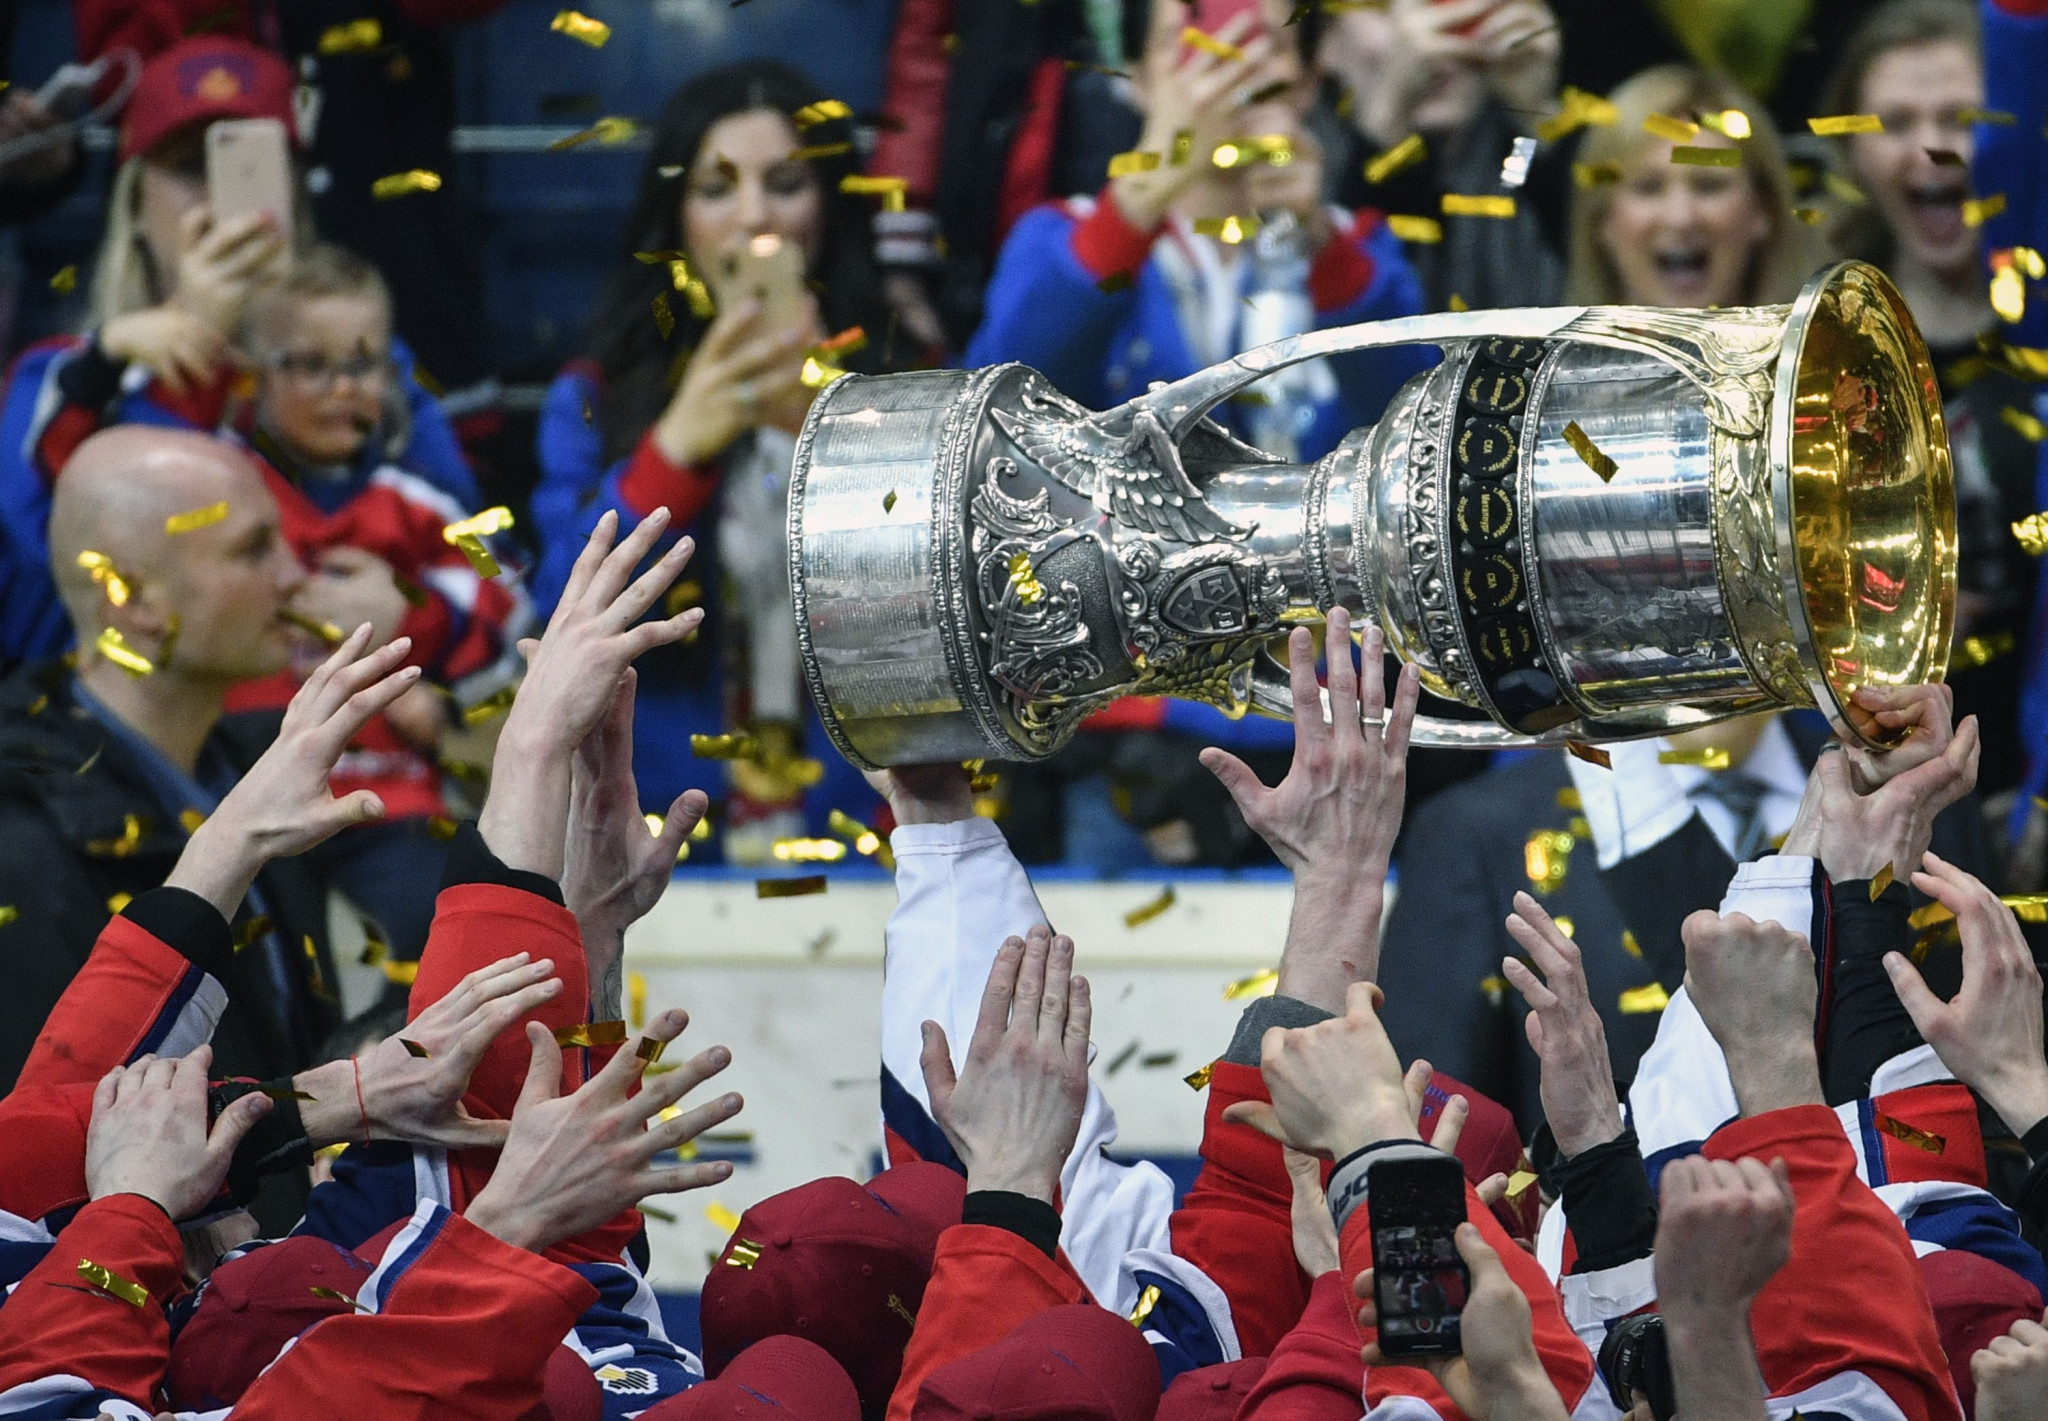 The Kontinental Hockey League largely features Russian teams ©Getty Images